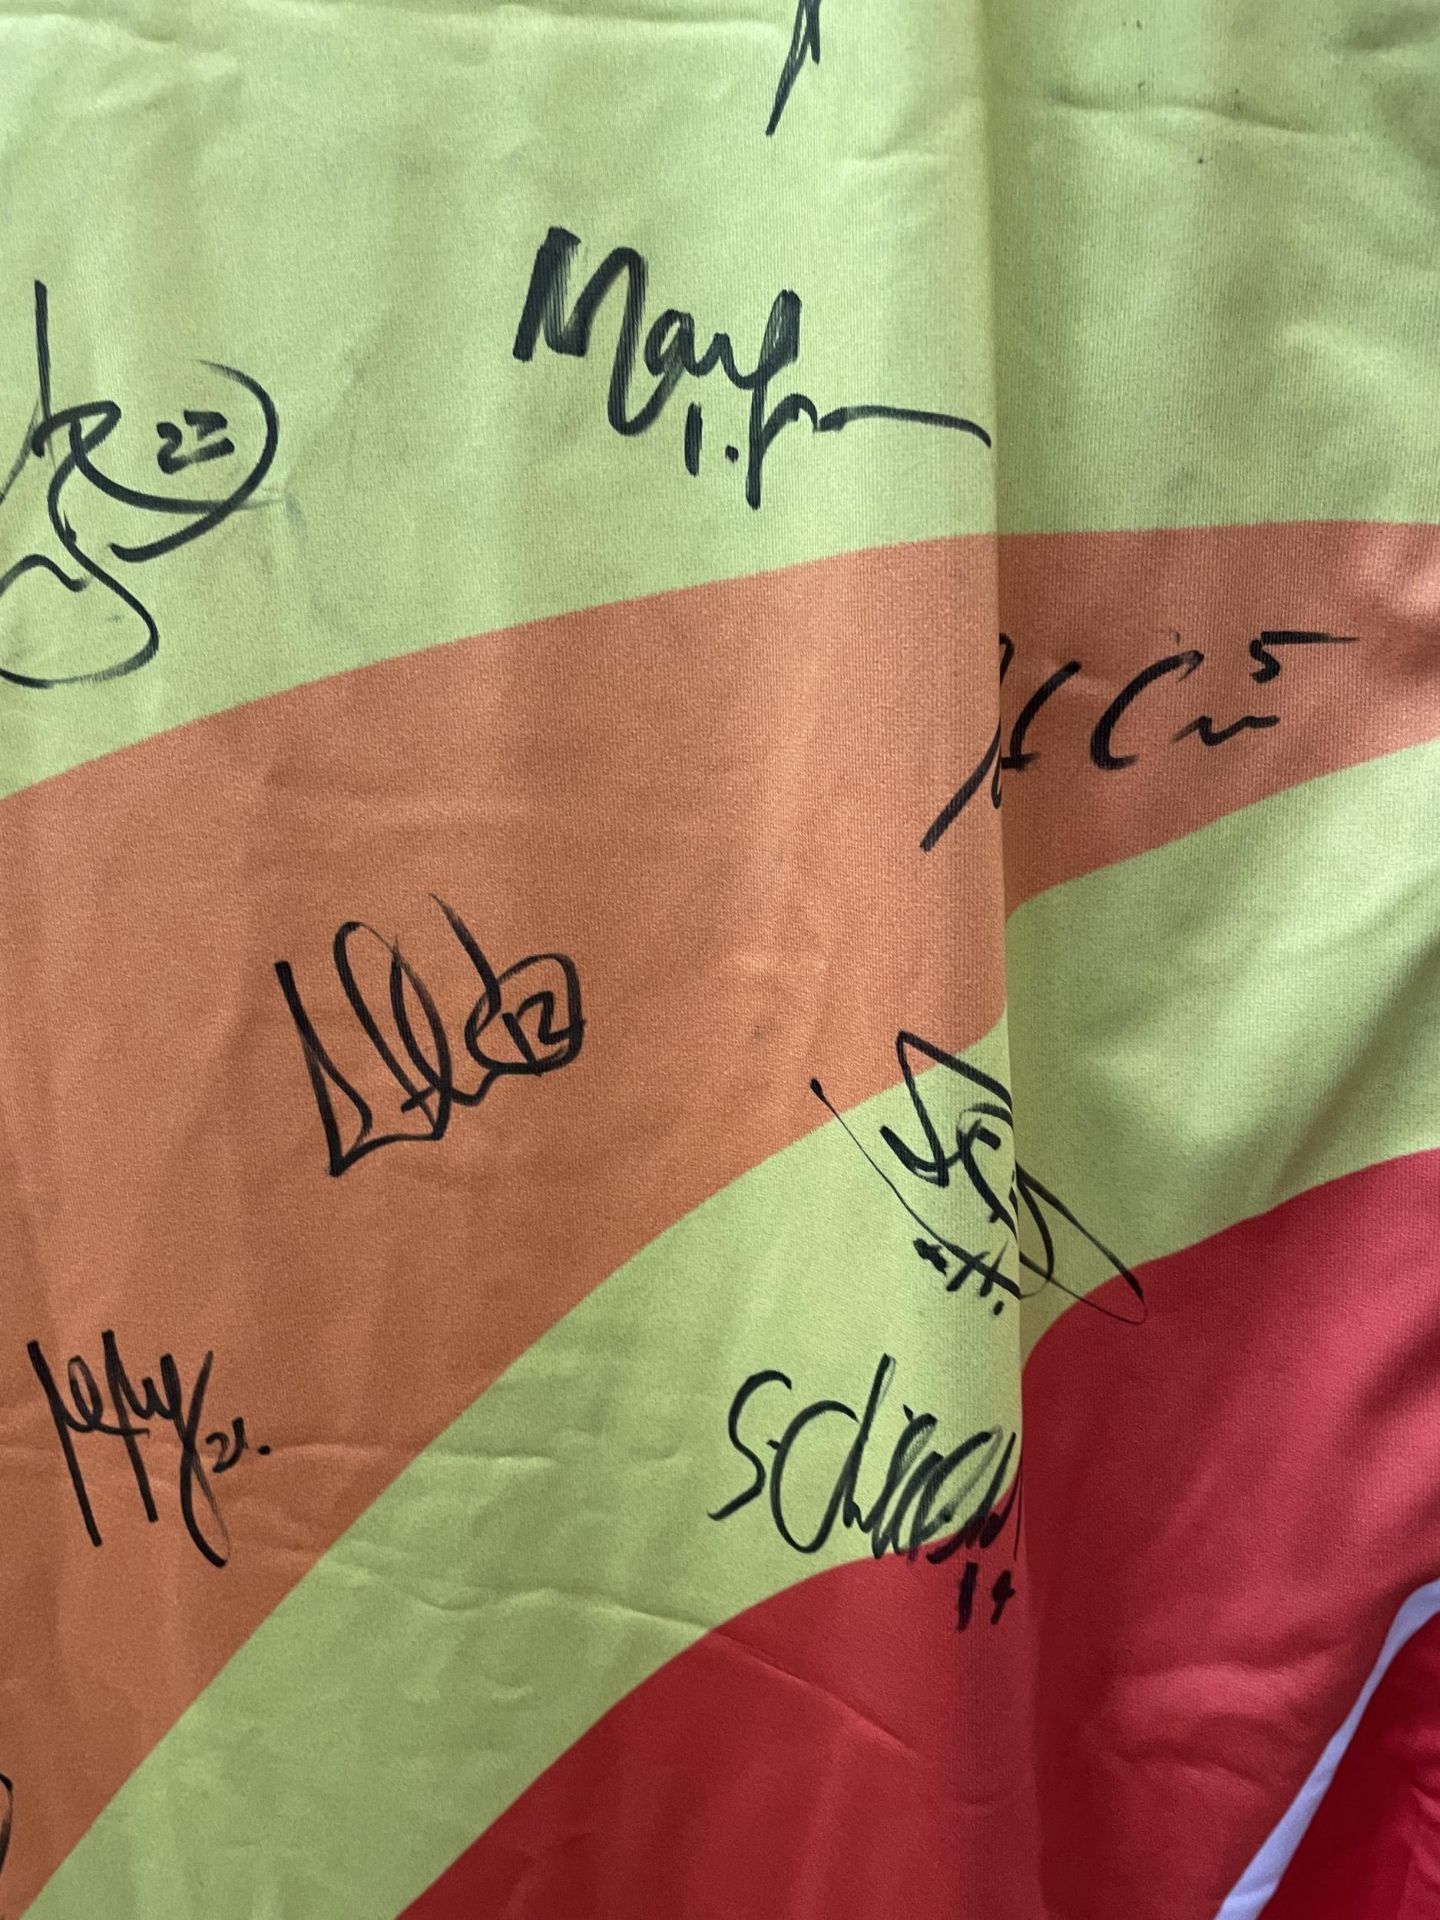 A FIFA WORLD CUP 2006 GERMANY SIGNED FLAG - Image 7 of 8